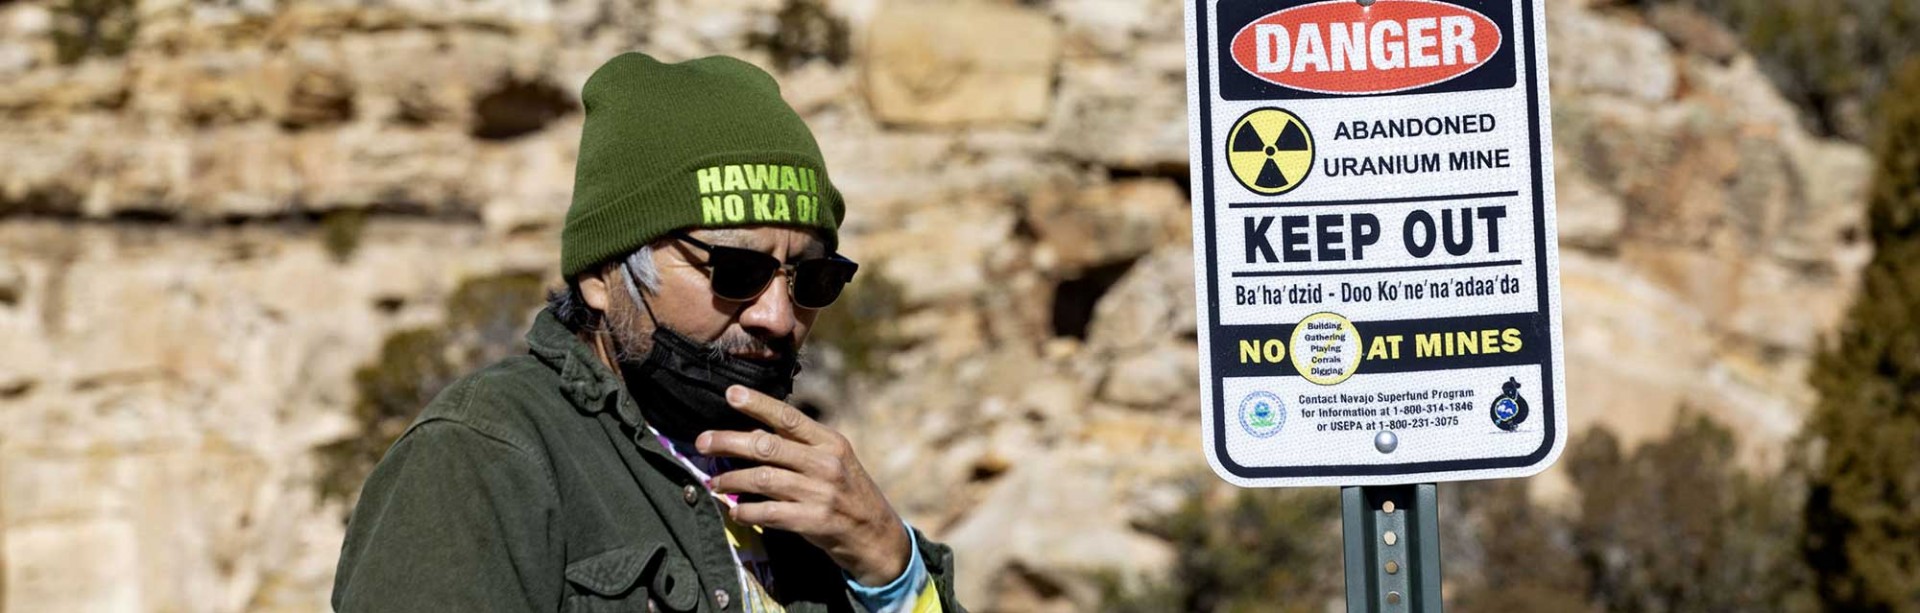 Photo of a man in knitted cap and sunglasses outdoors by a sign warning of danger from an abandoned uranium mine